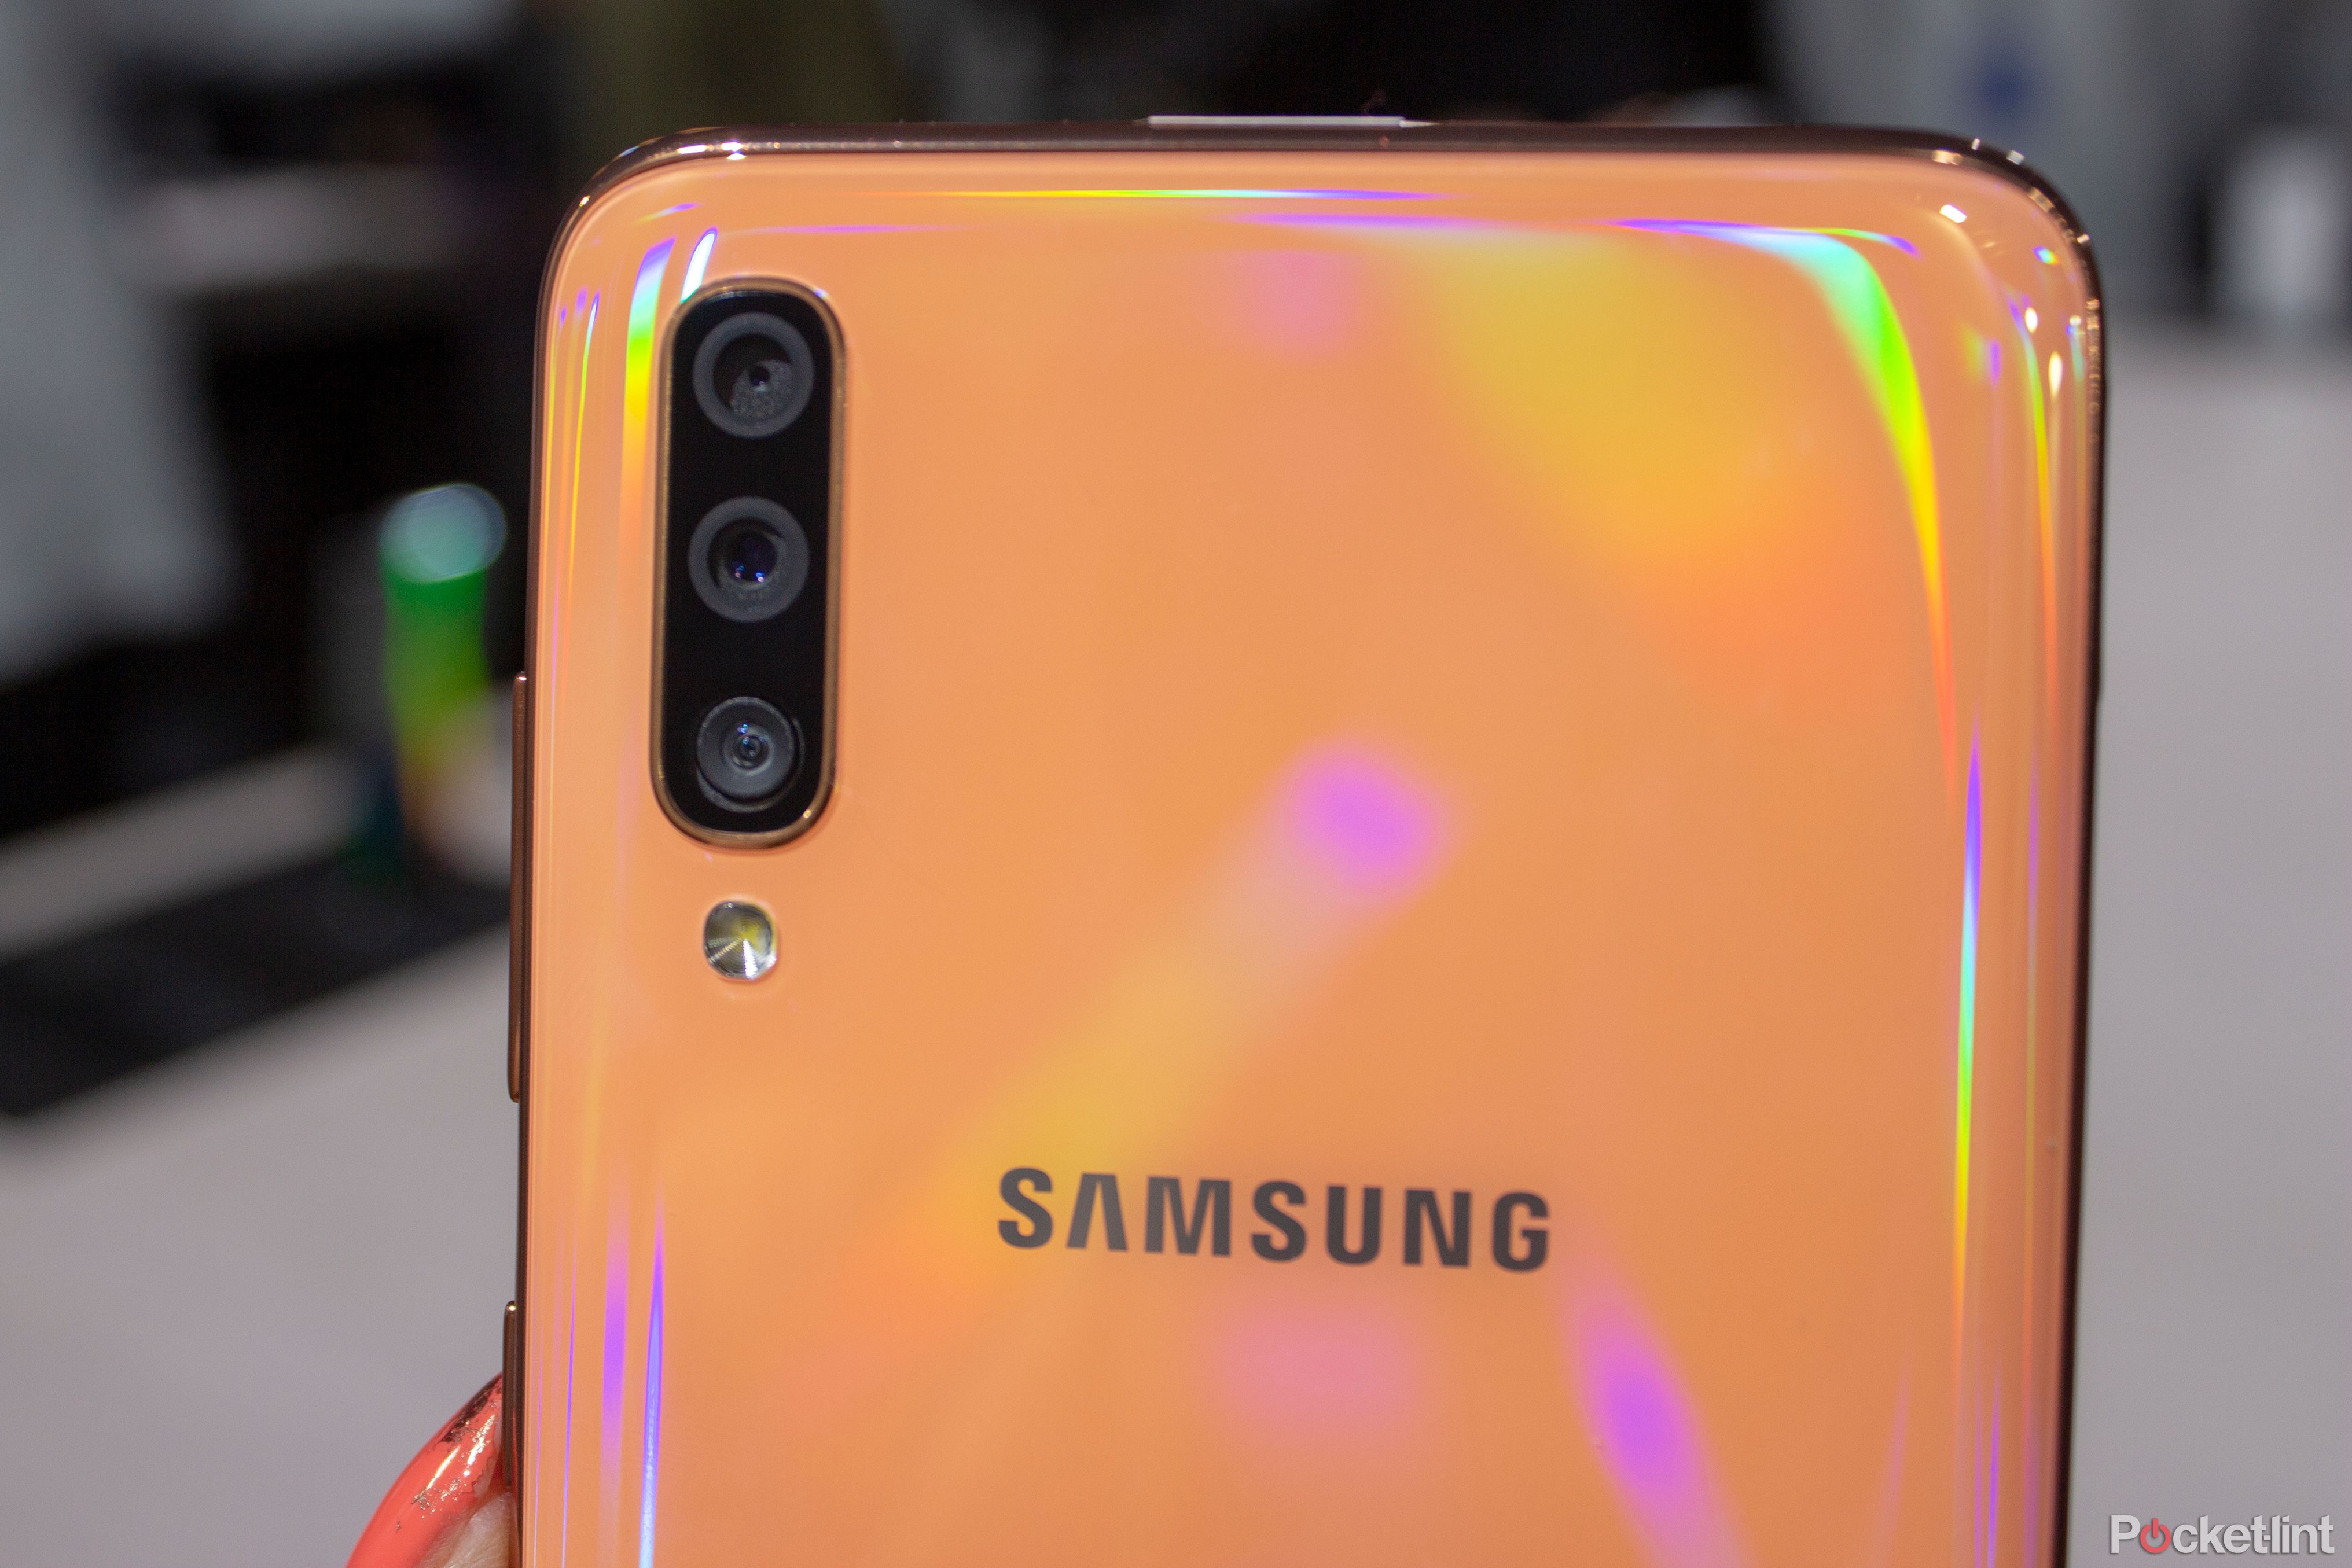 Samsung Galaxy A70 initial review product images image 13